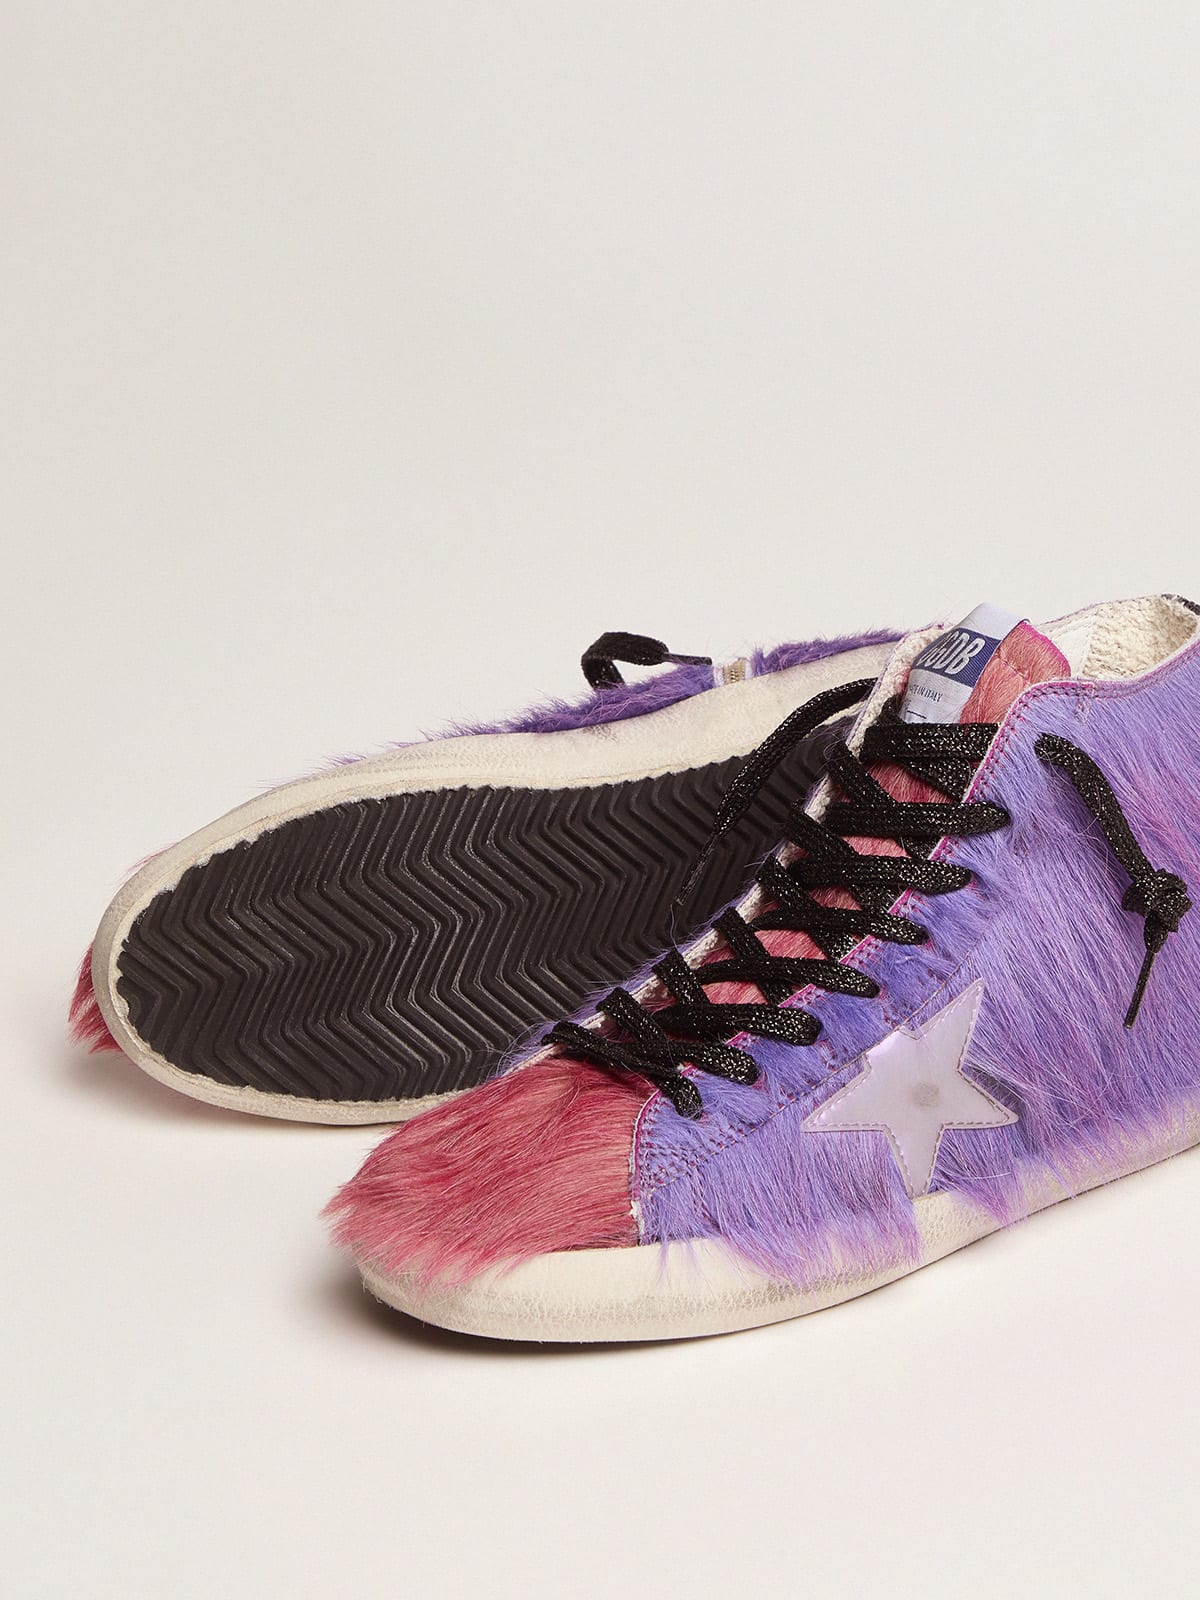 Golden Goose - Women’s Limited Edition lilac and pink pony skin Francy sneakers in 